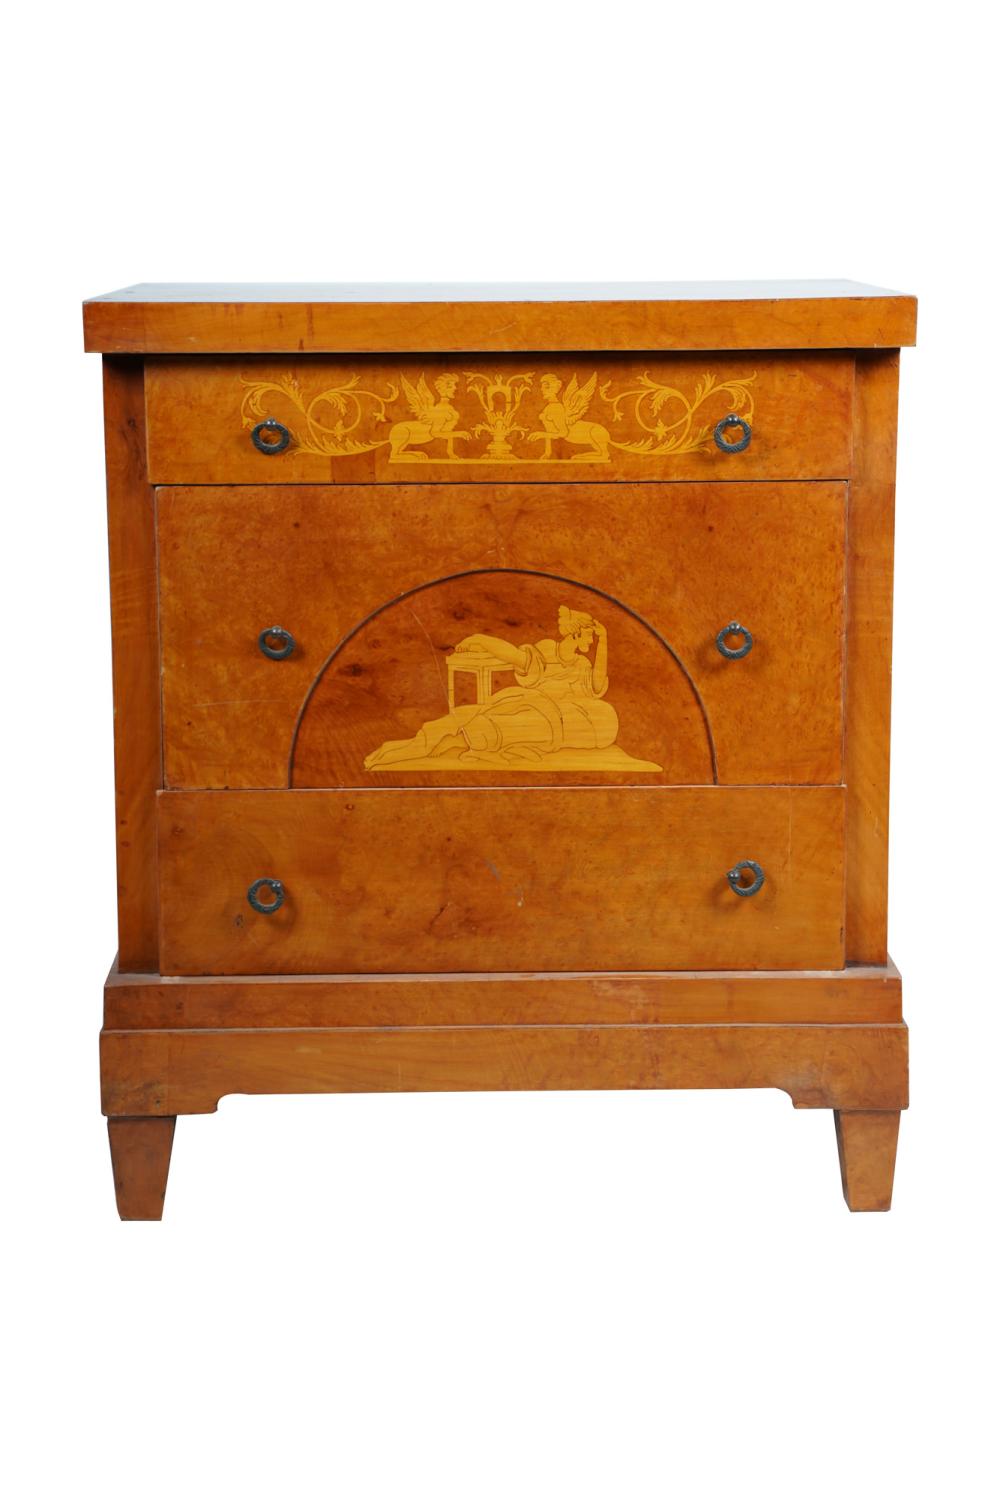 BALTIC NEOCLASSIC STYLE CHEST OF